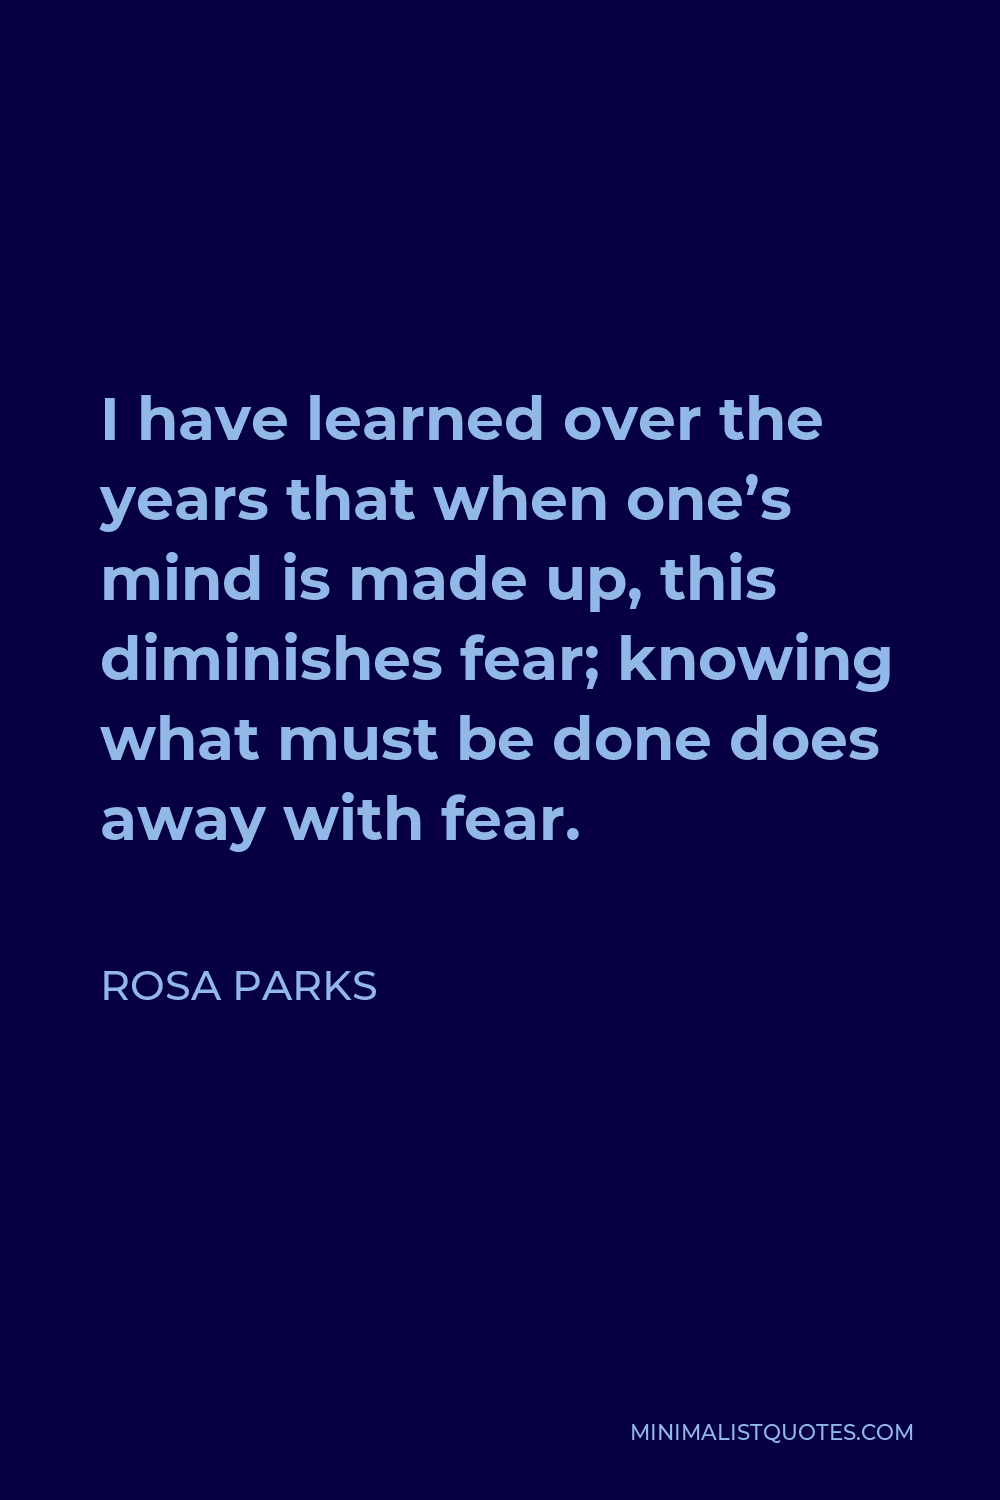 Rosa Parks Quote - I have learned over the years that when one’s mind is made up, this diminishes fear; knowing what must be done does away with fear.